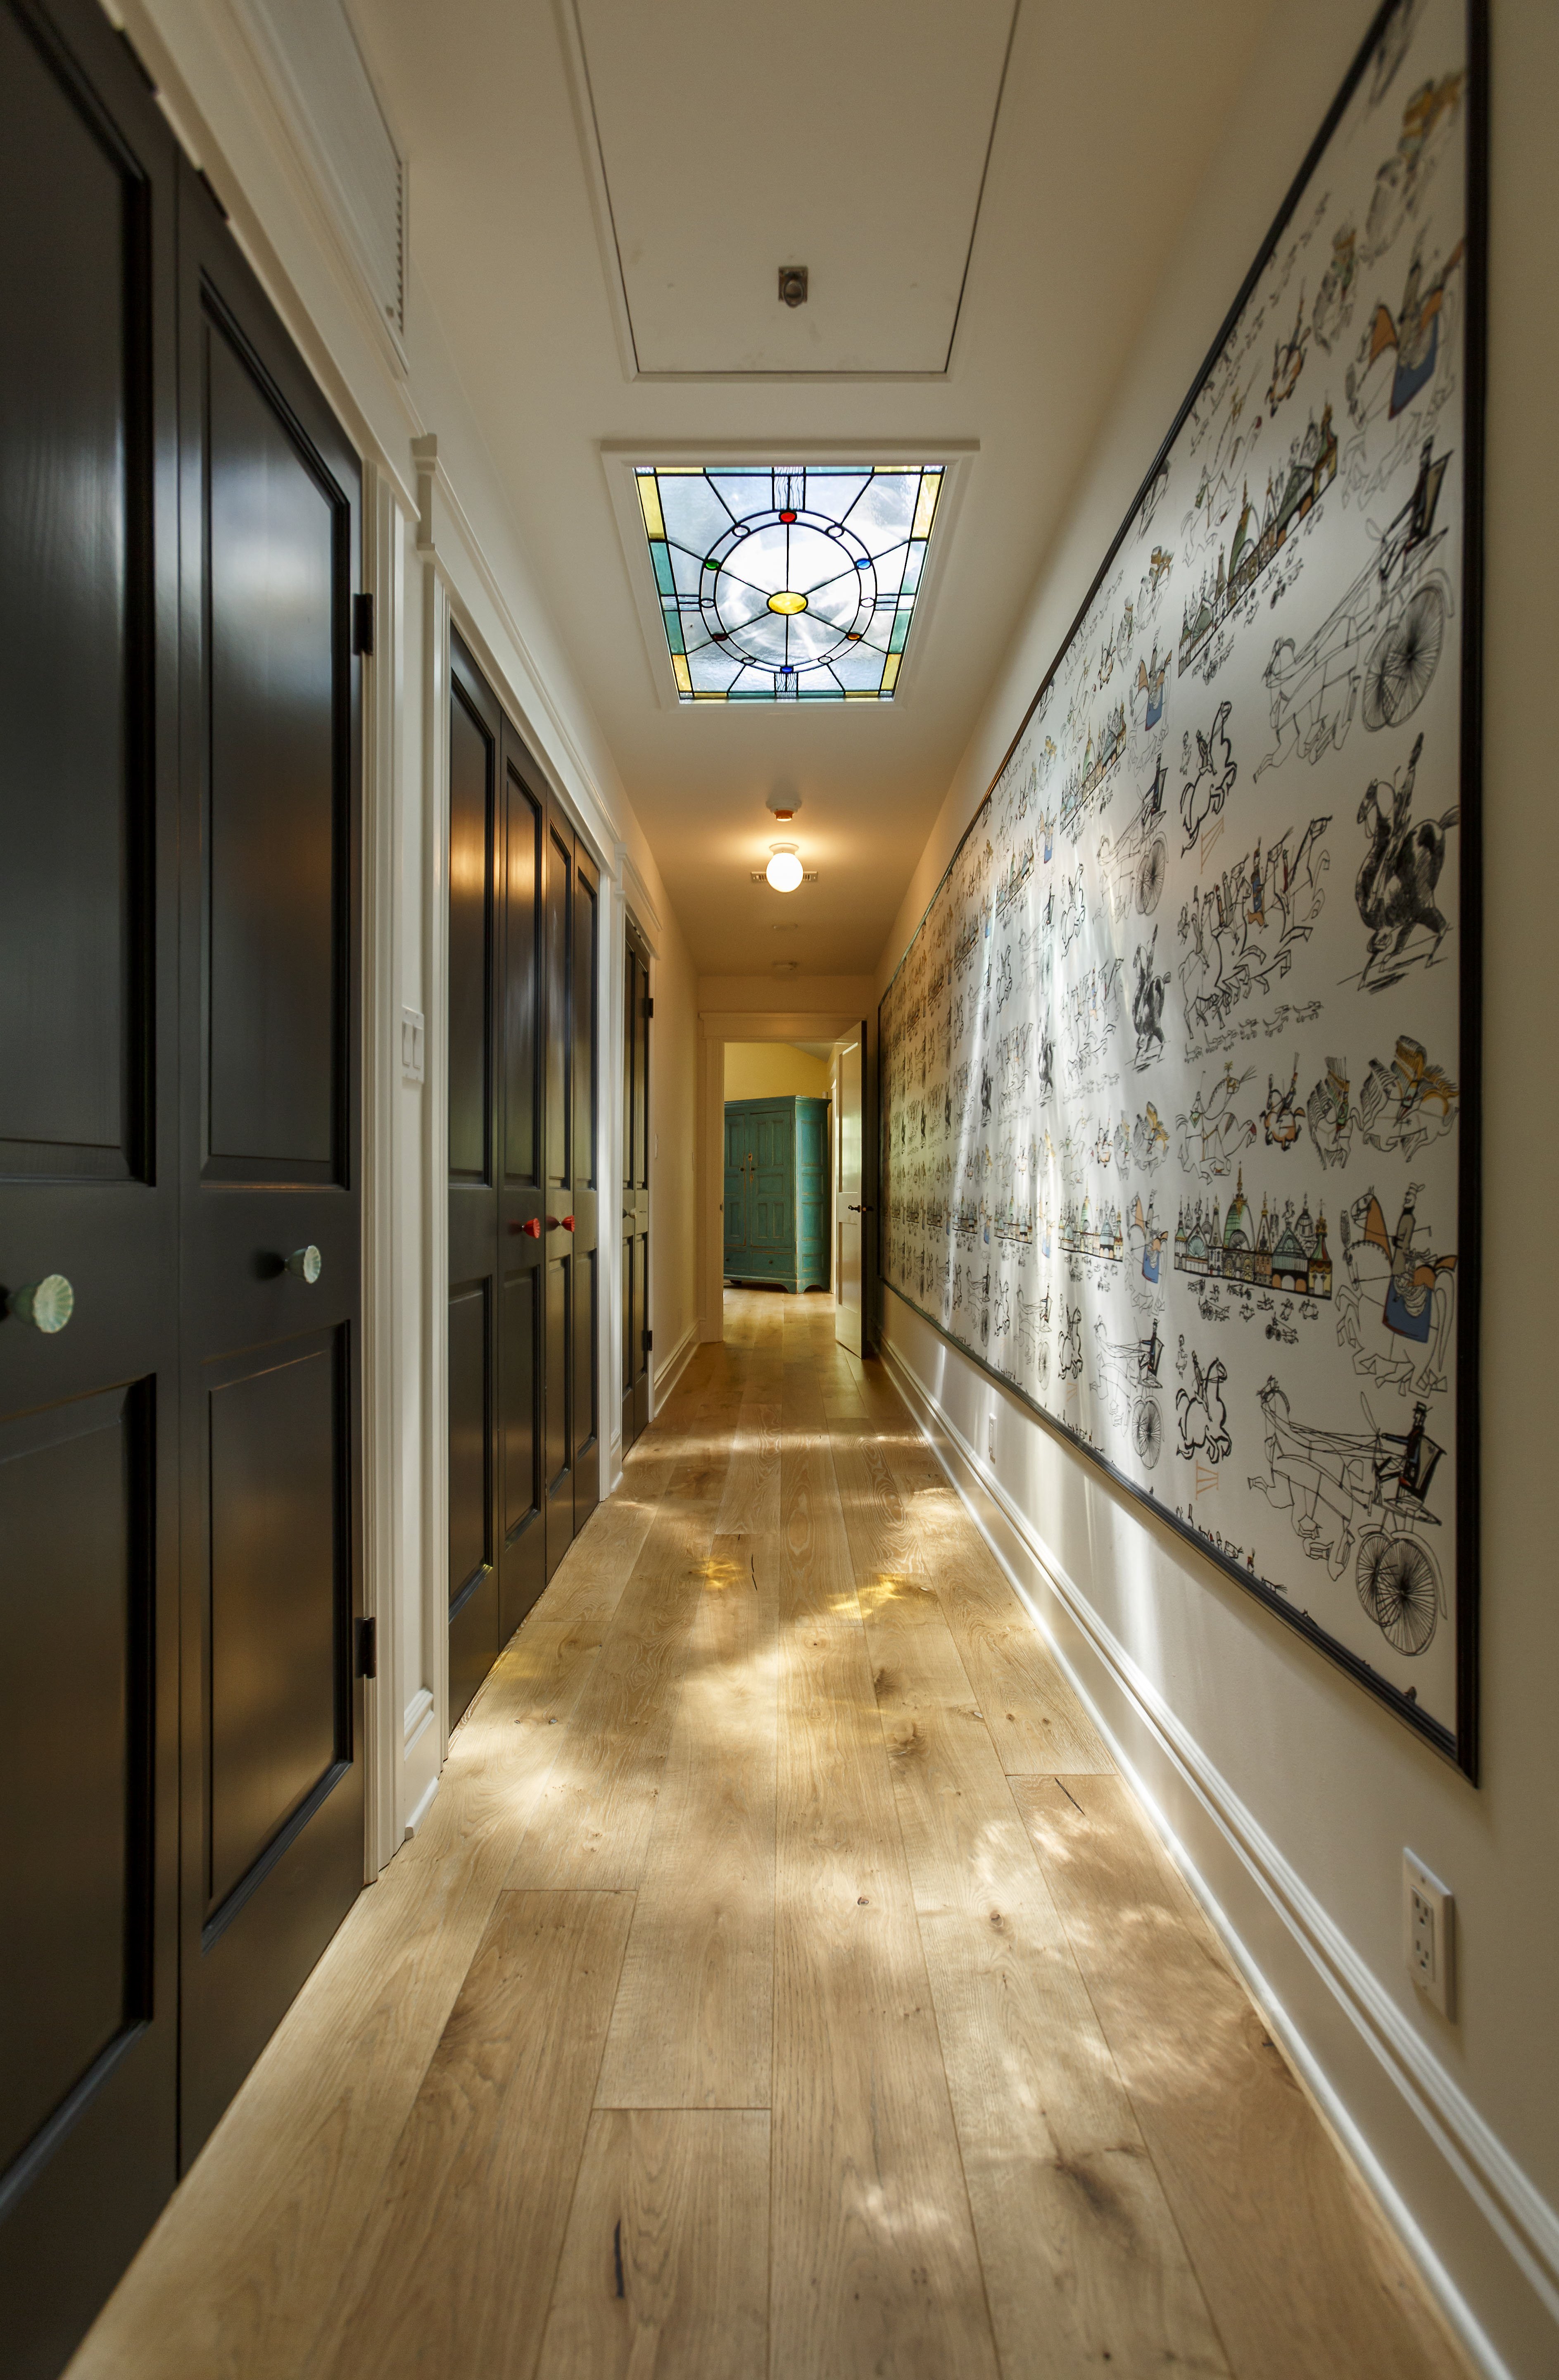 Hallway with stained-glass skylight , connecting the dining room to the bedroom Craftsman home of actress Linda Hunt, September 19, 2014 | Source: Getty Images